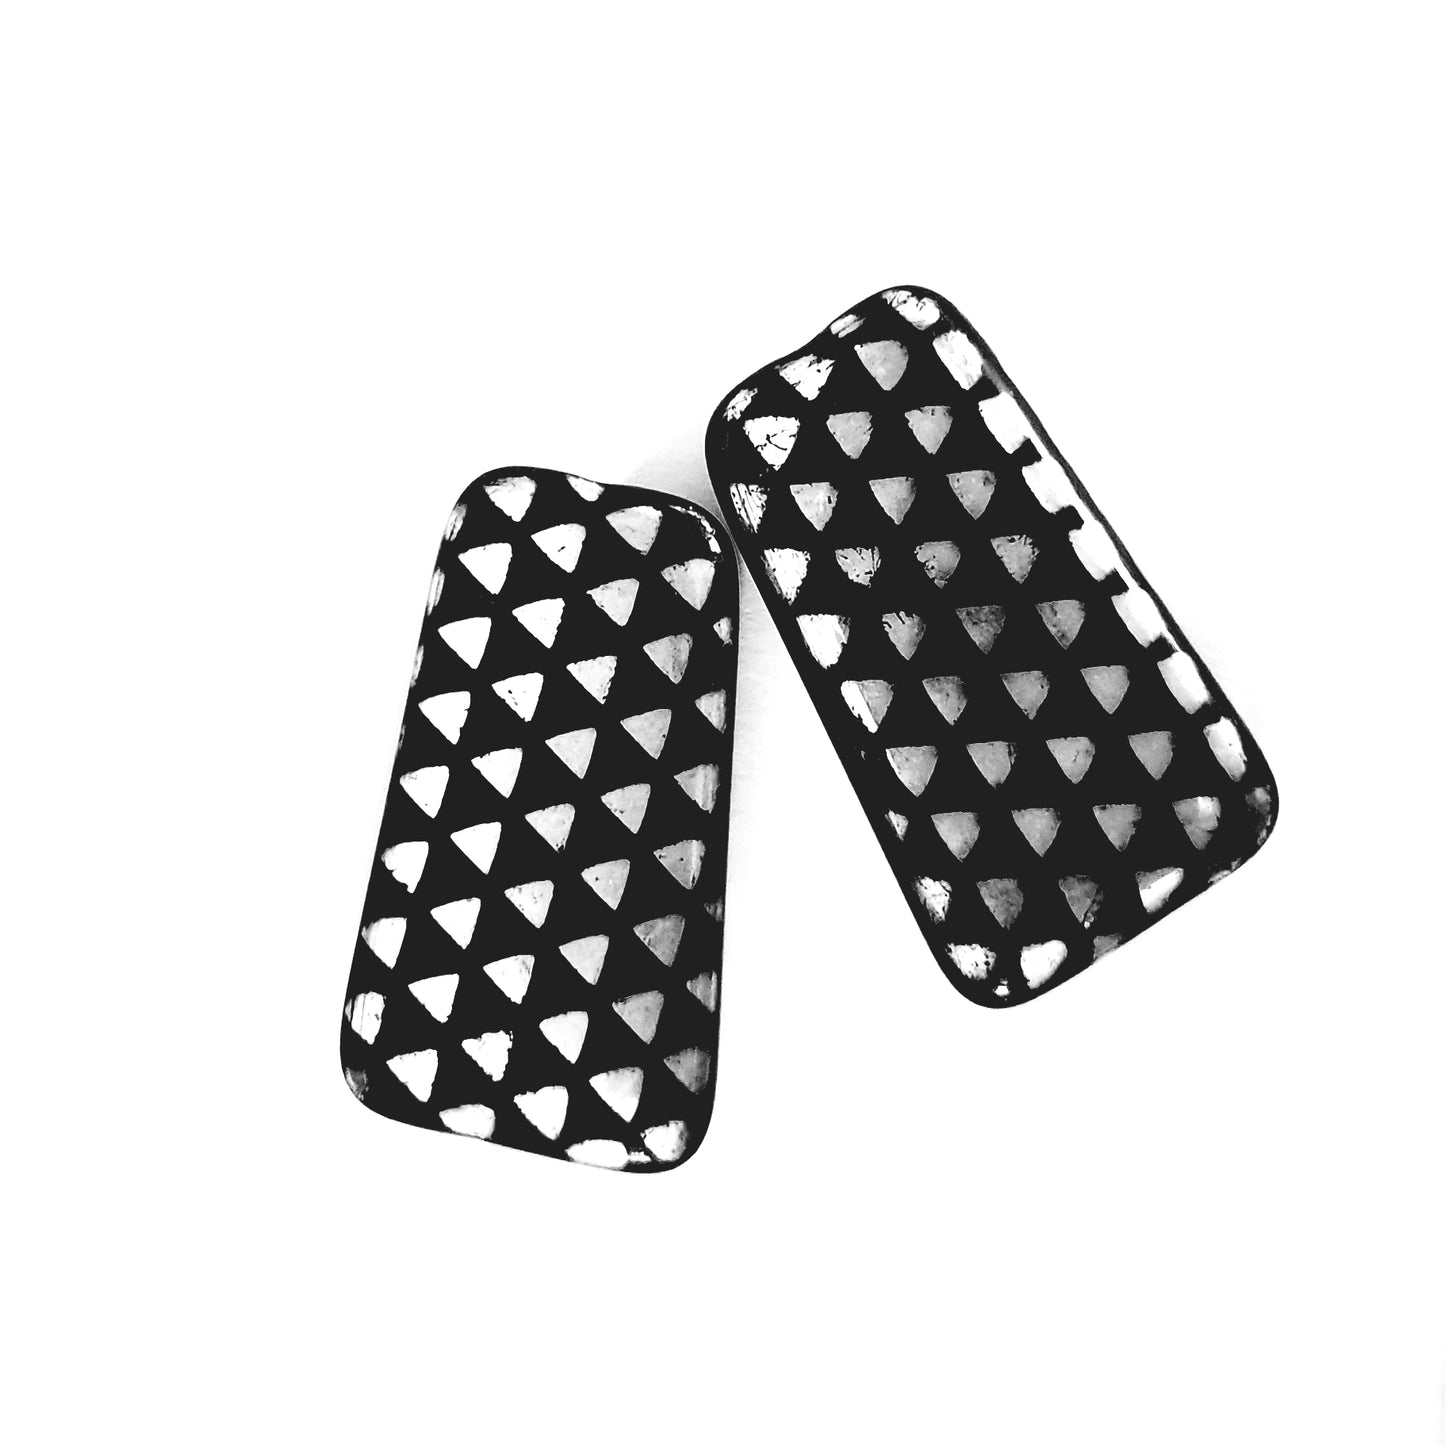 Black Trapezoid Opaque with Decal Triangle 35x20mm Czech Glass Bead